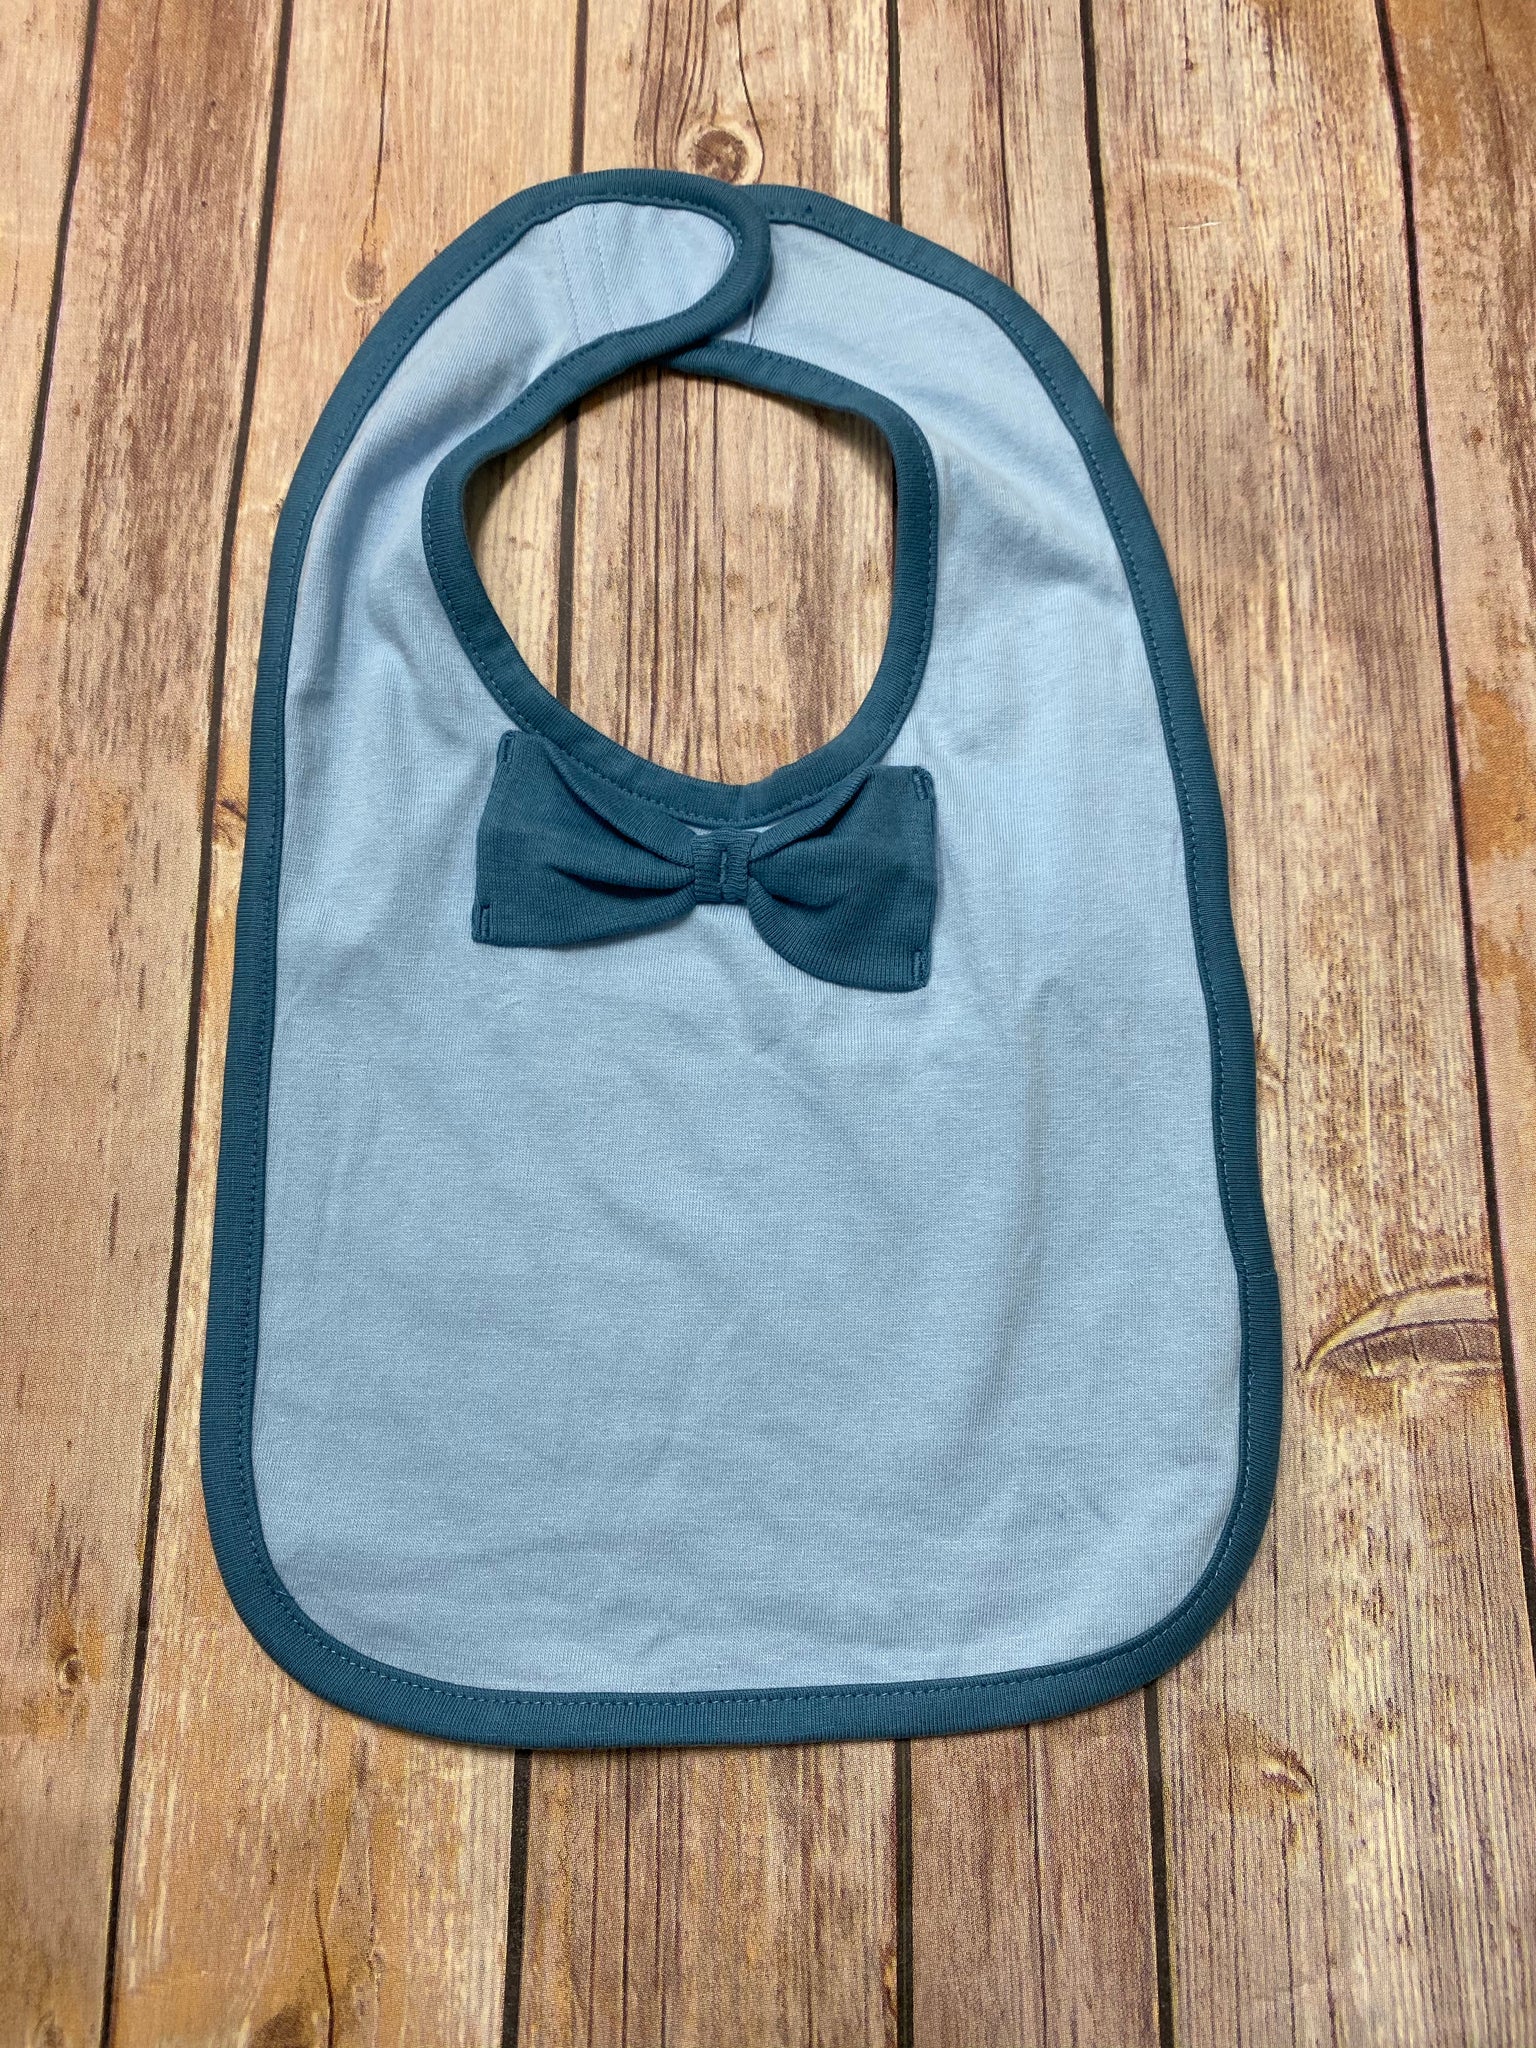 Baby Bib with Bow Tie - blue - Sew Cute By Katie